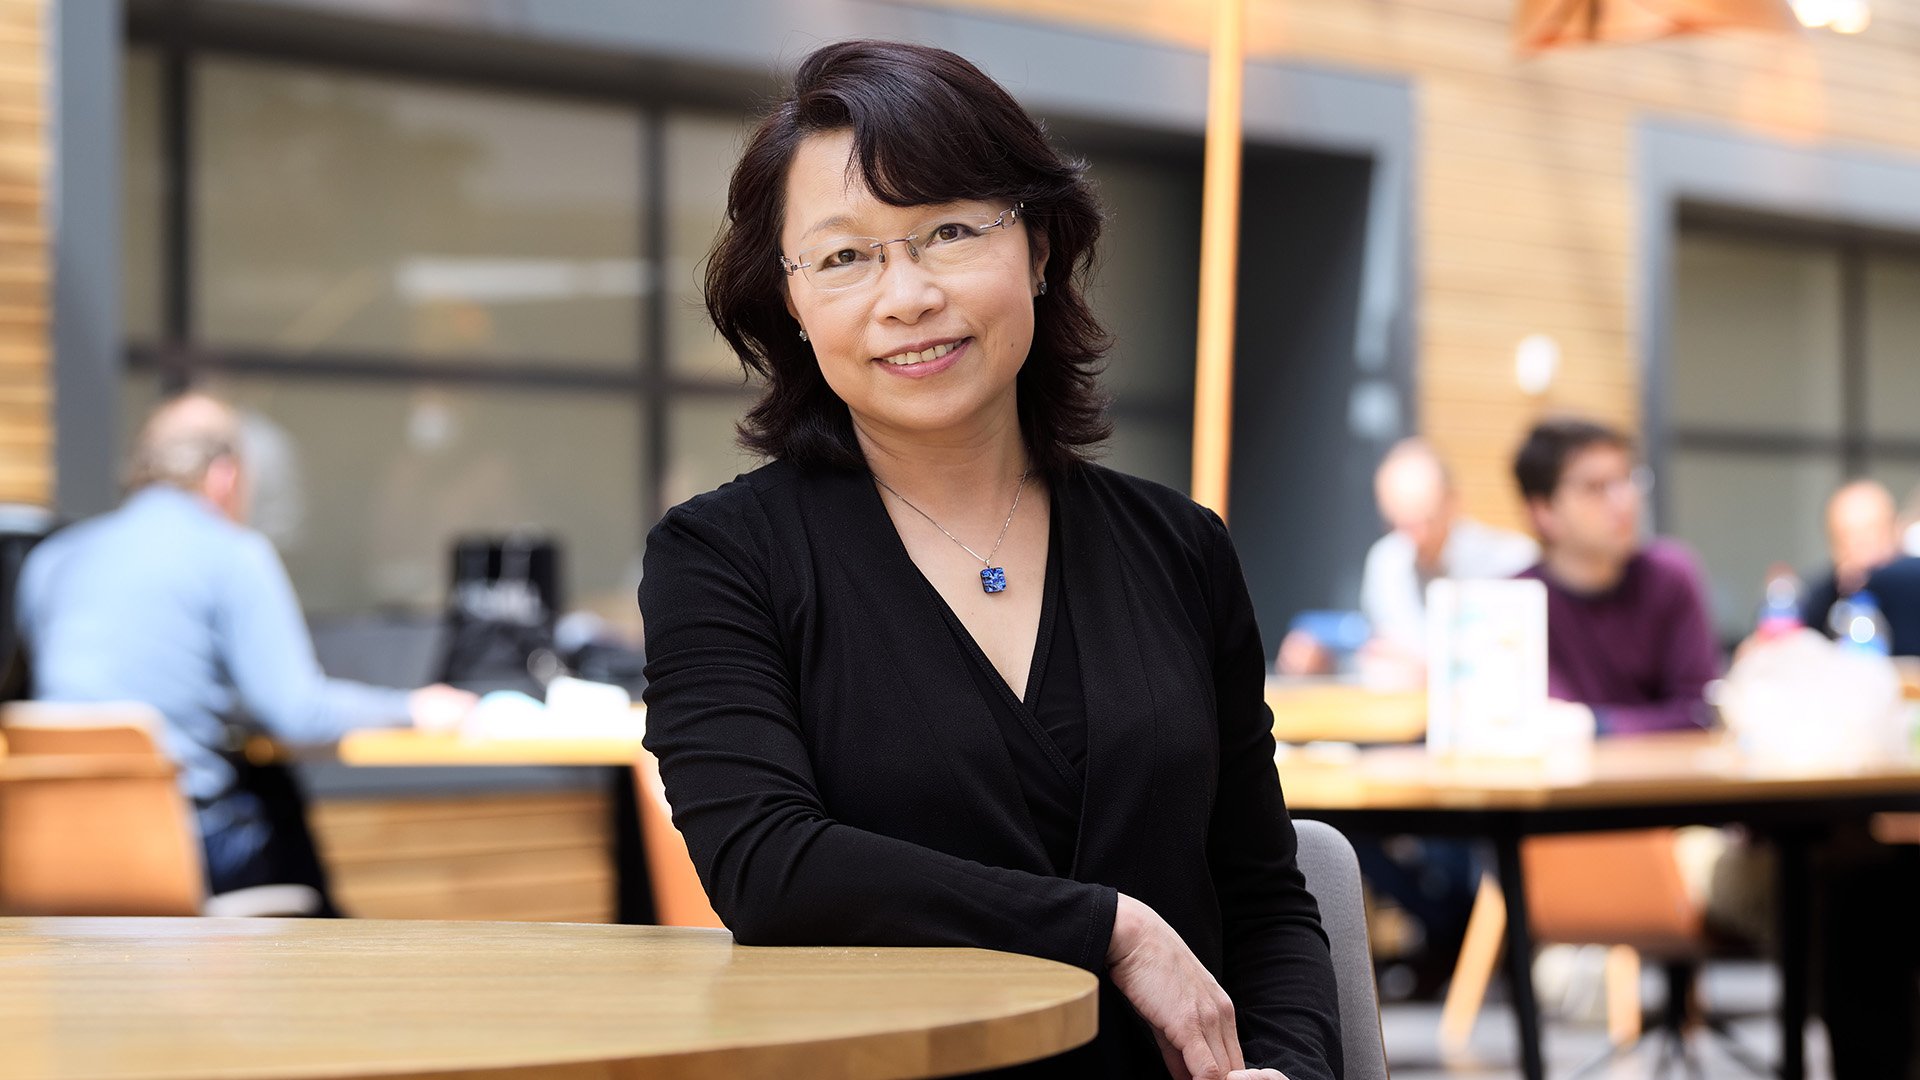 Vice president of Software R&D Wei Li poses for the camera at ASML in Veldhoven, the Netherlands.